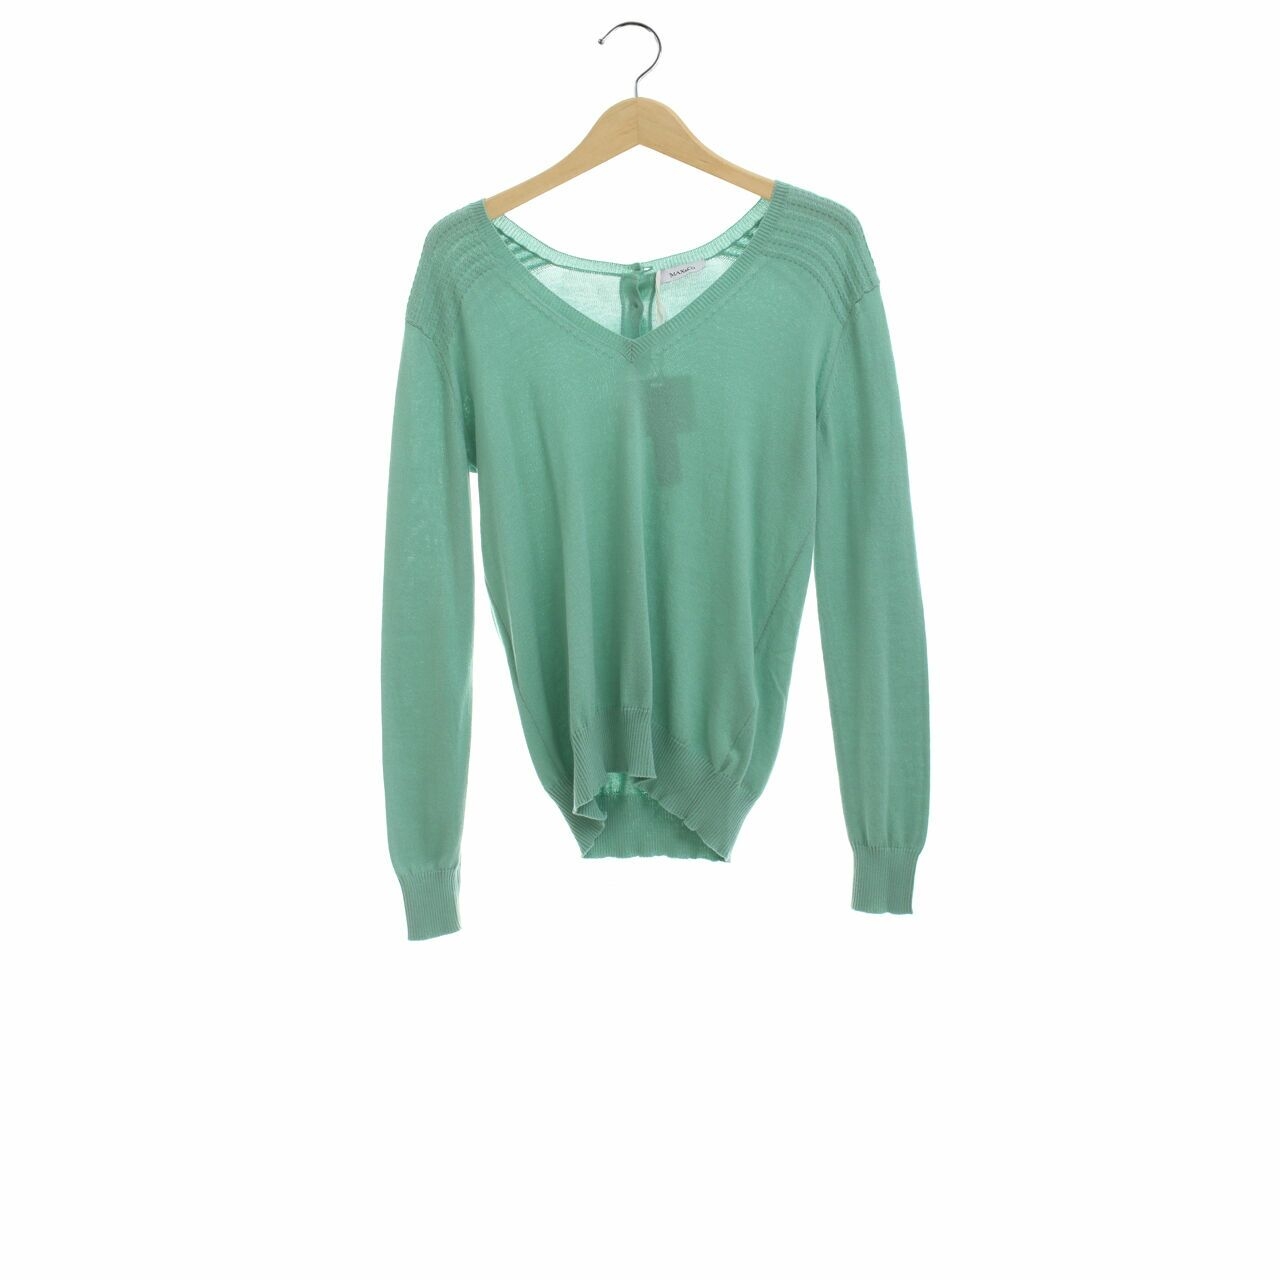 Max & Co. Green Knit Sweater